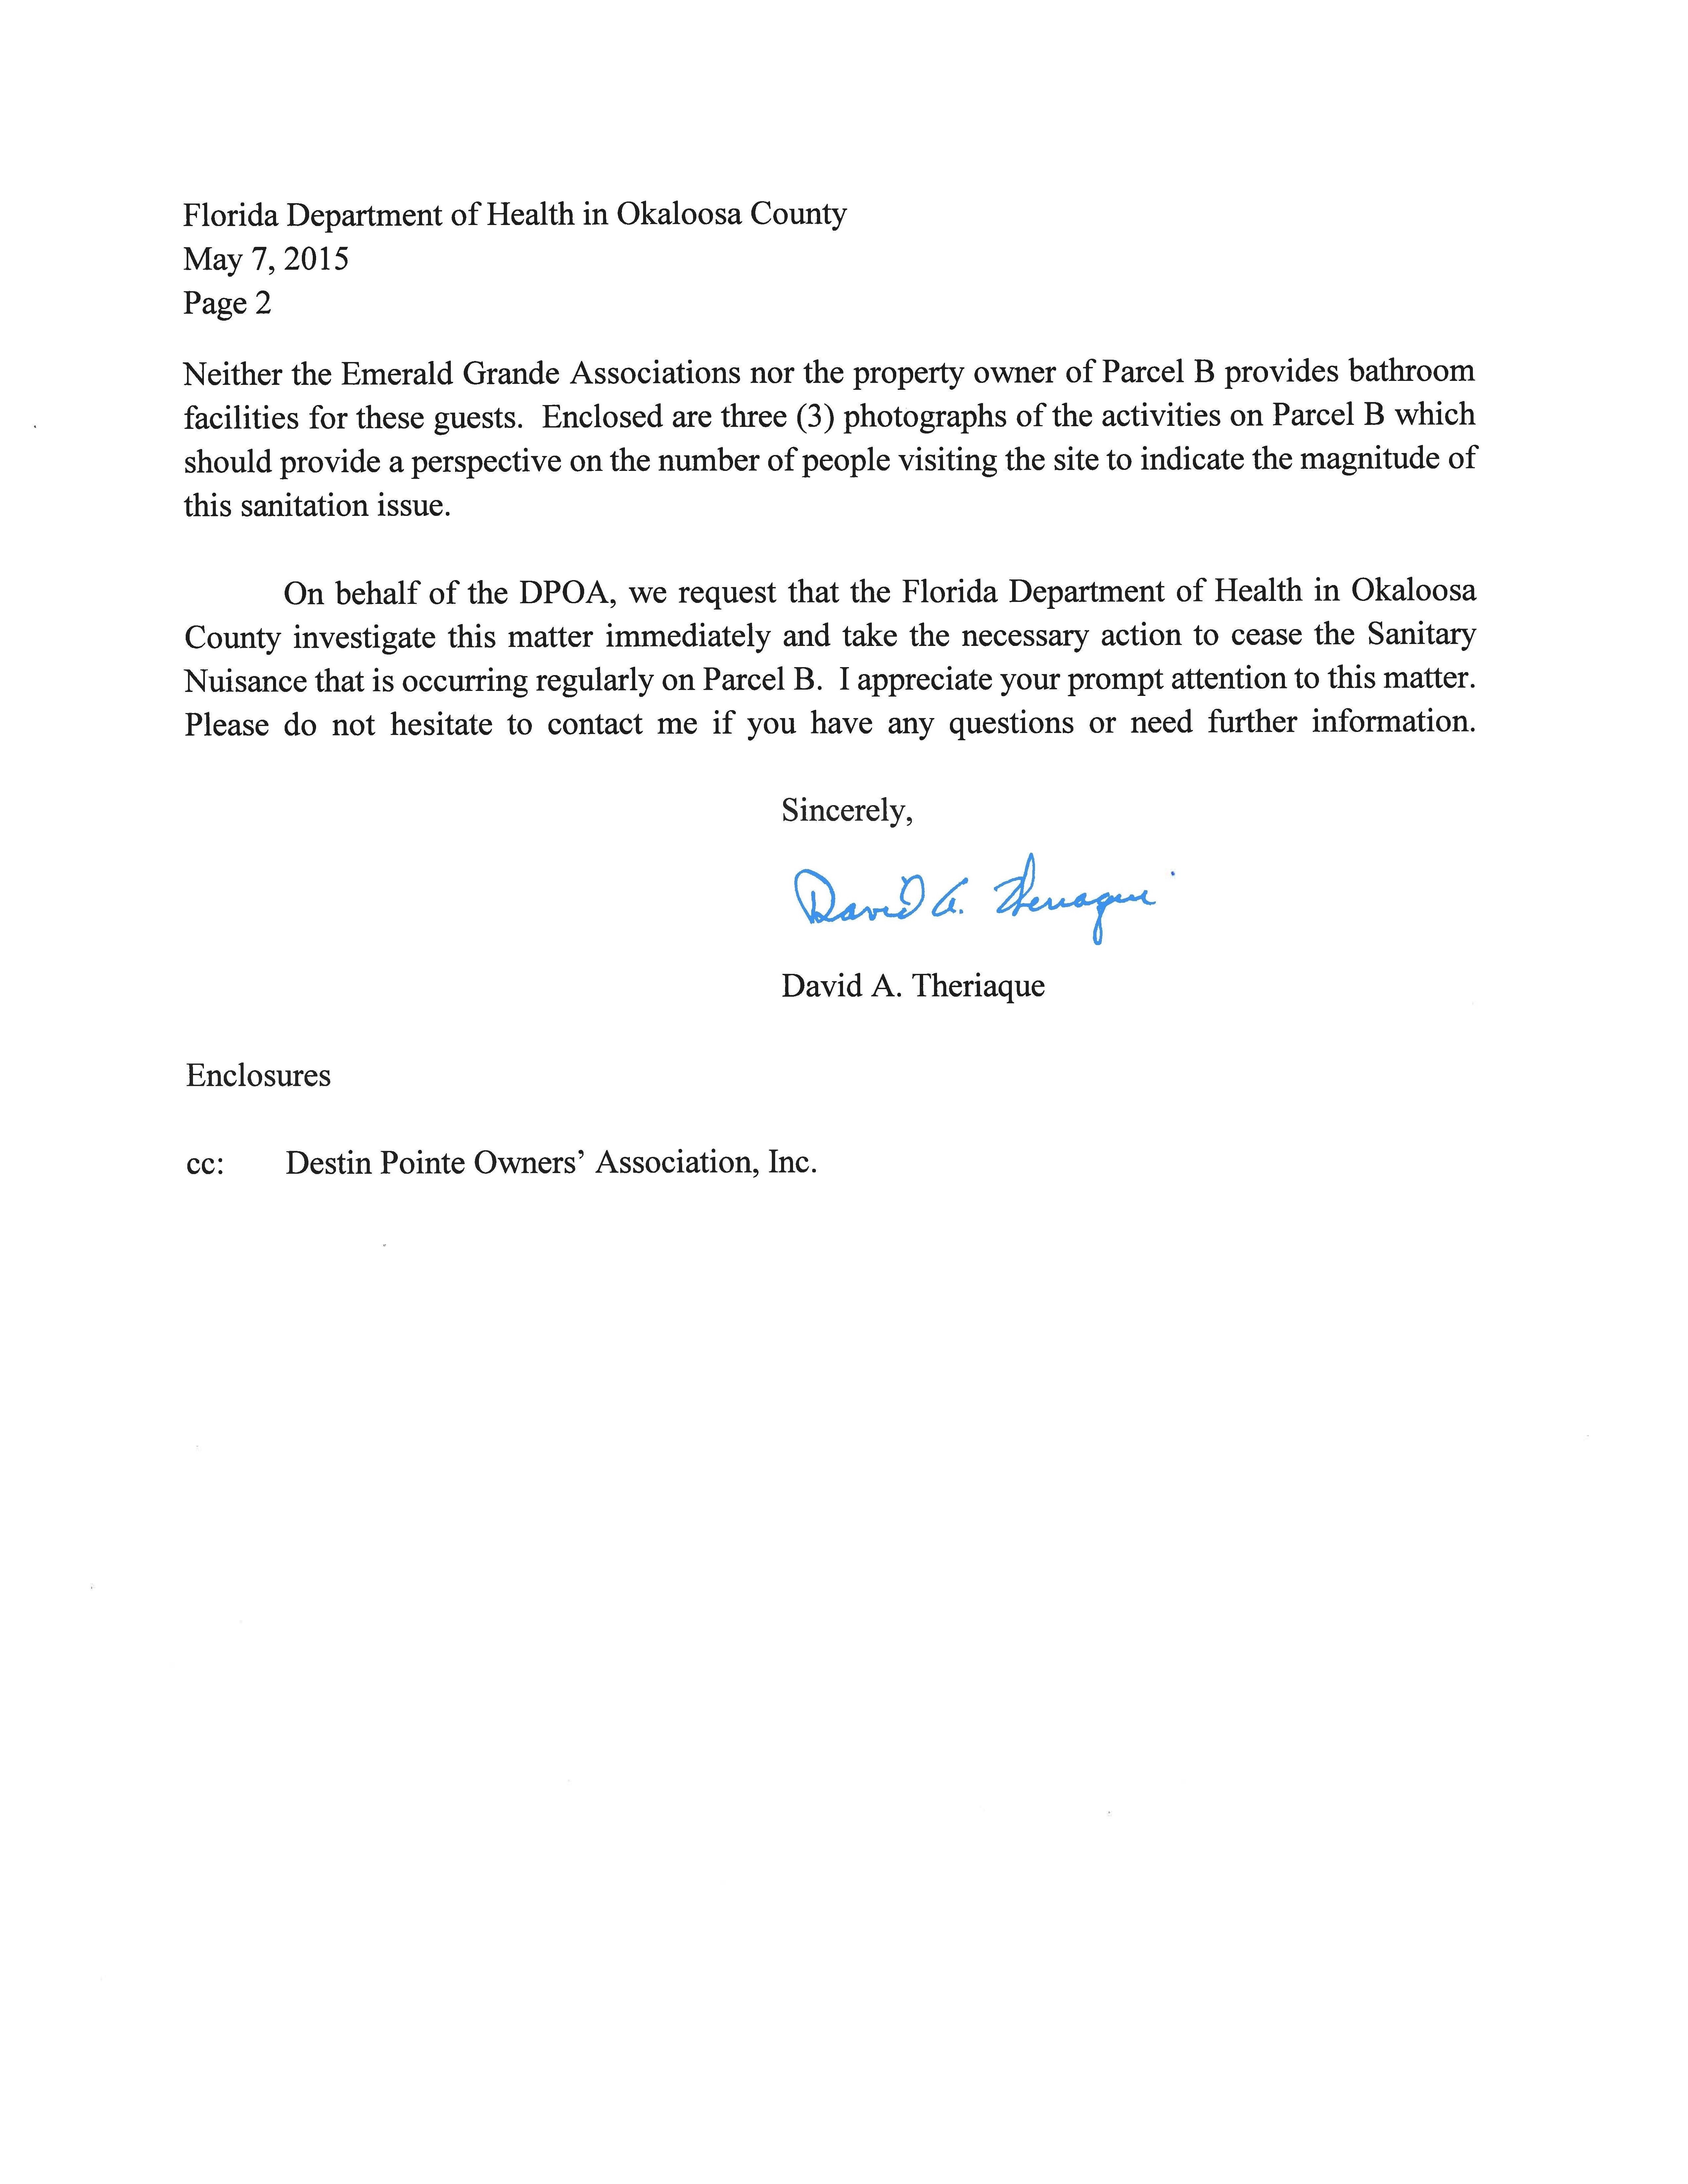 Letter dated 5-7-15 to Florida Department of Health in Okaloosa County_Page_2